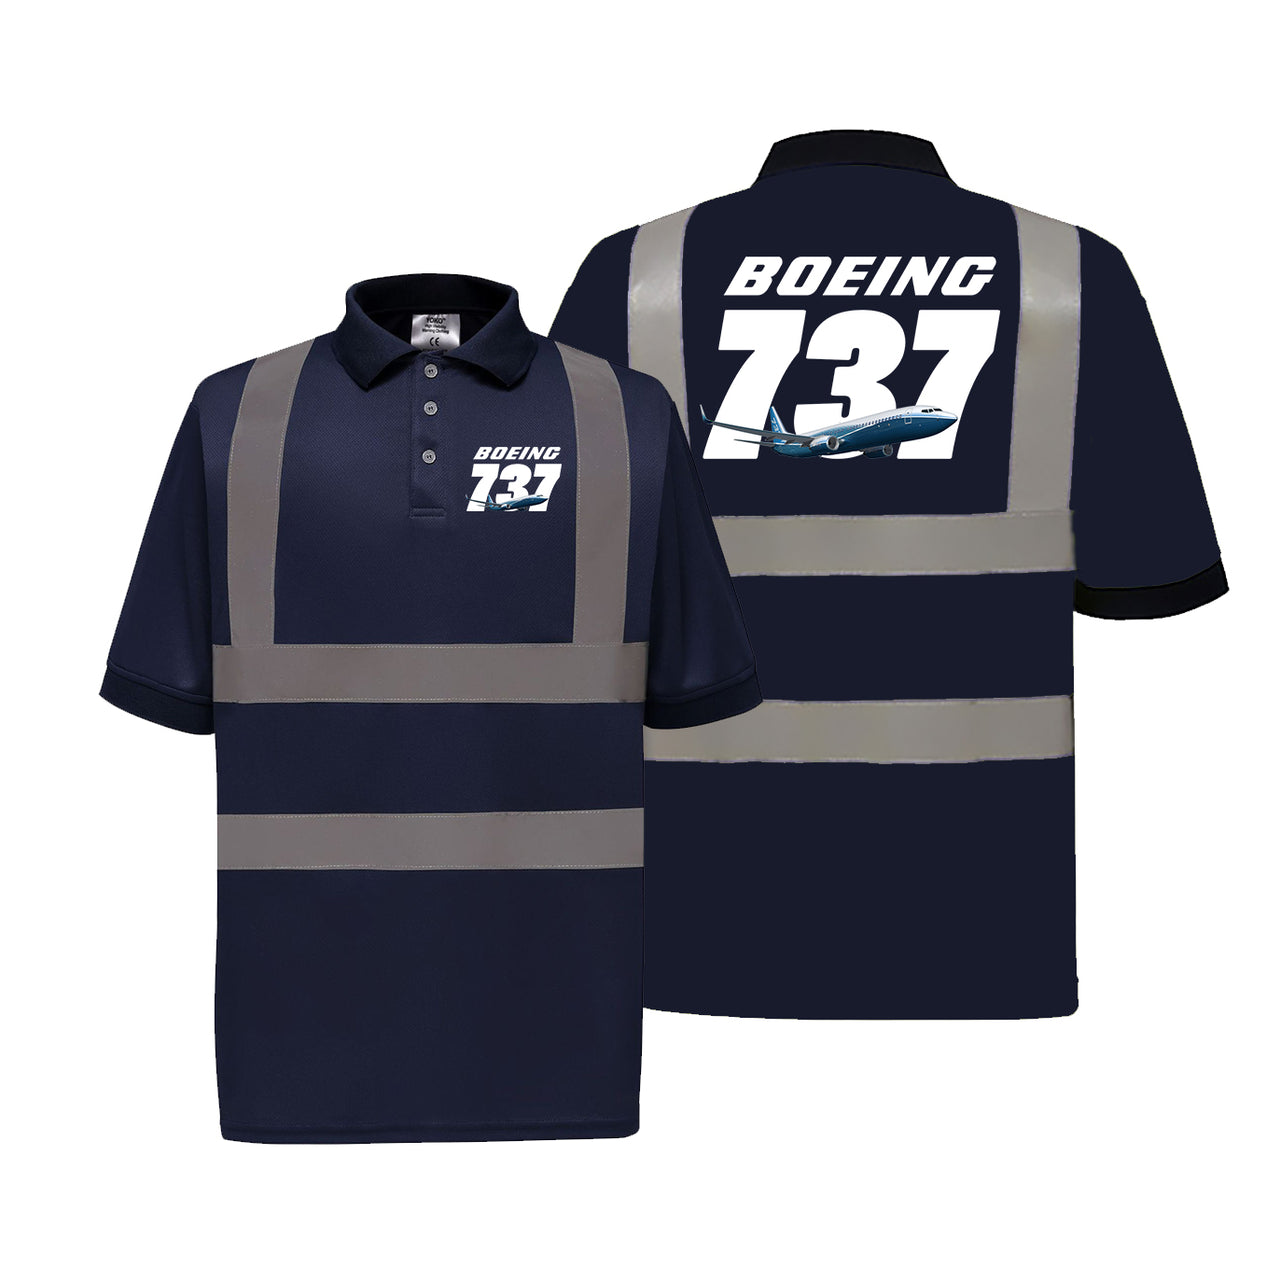 Super Boeing 737+Text Designed Reflective Polo T-Shirts